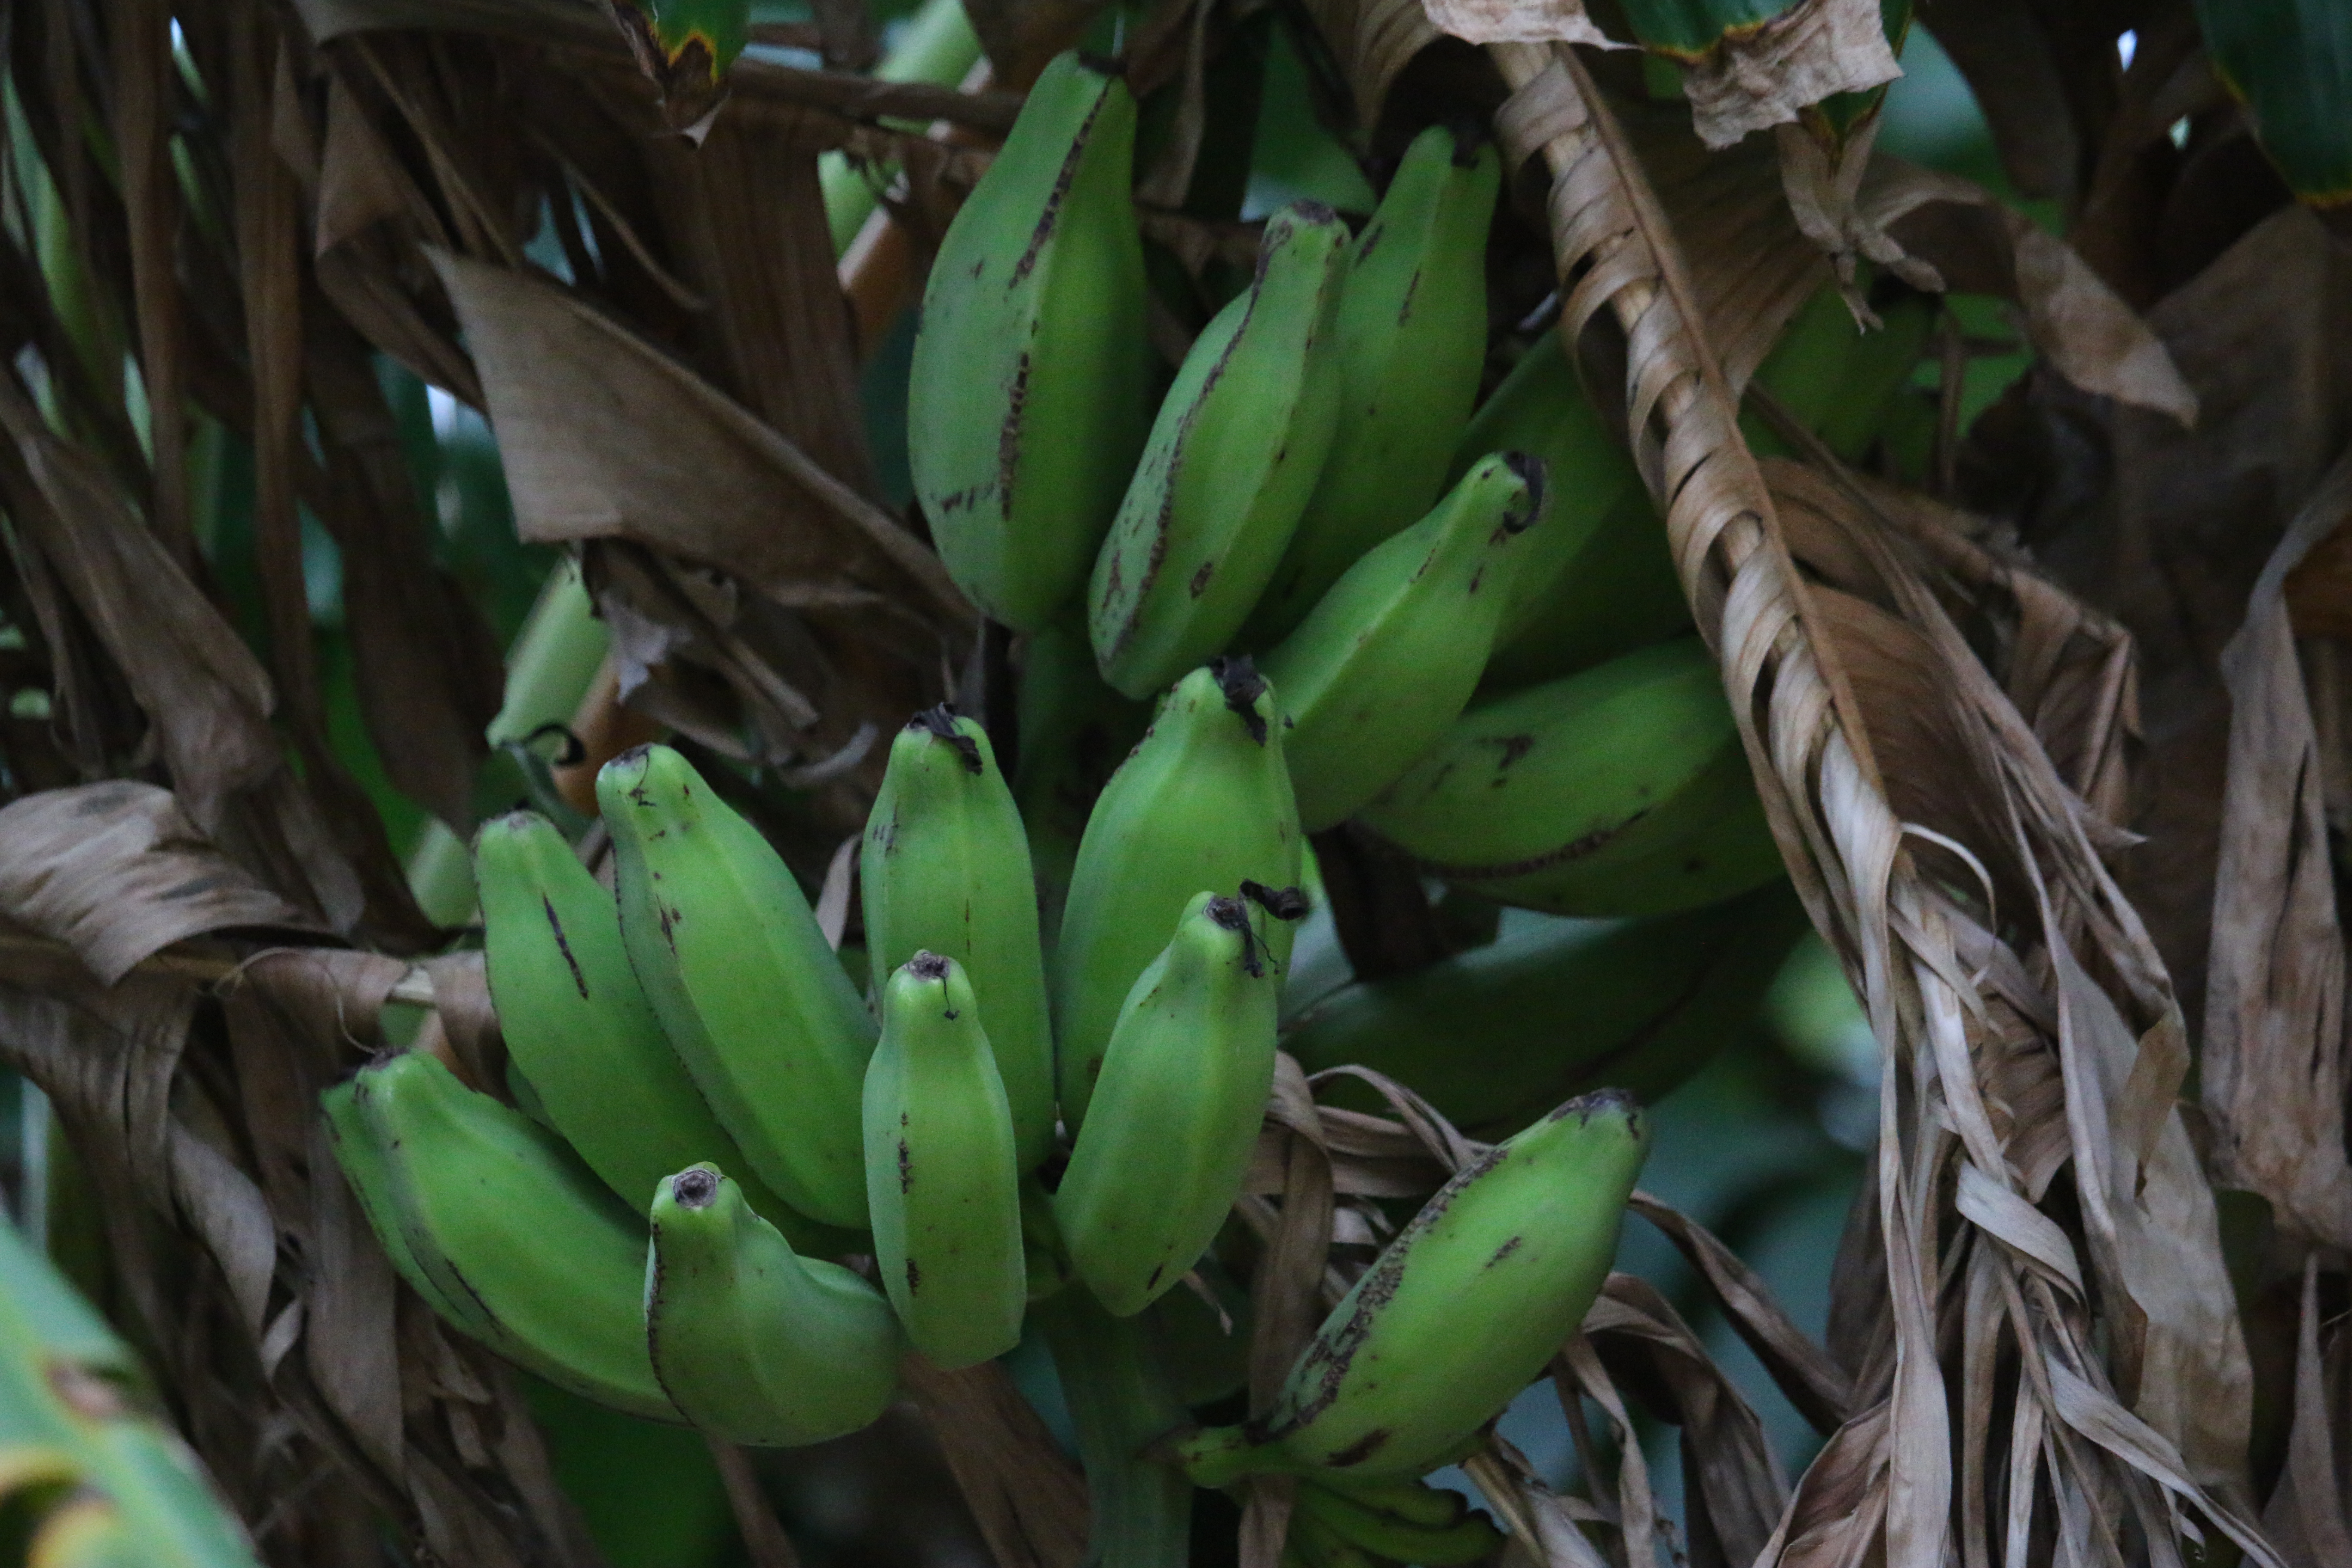 Plantains on the hoof (so to speak)